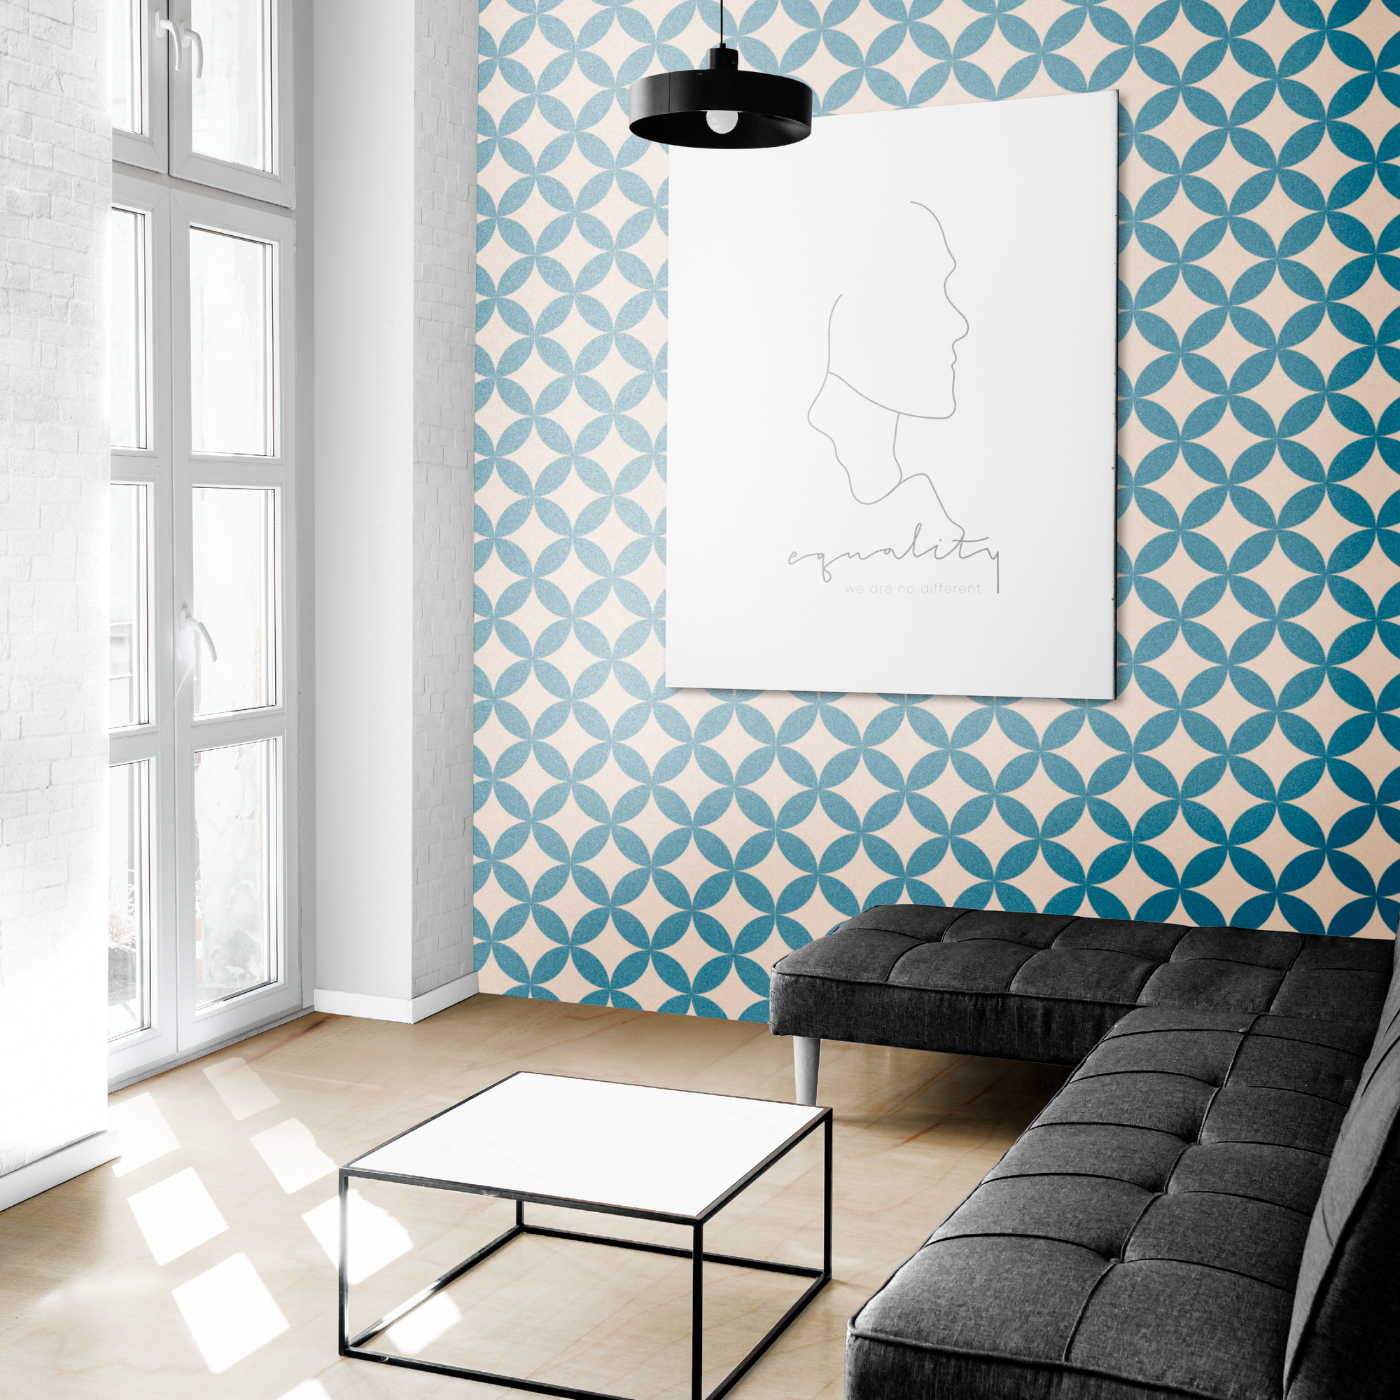 2D Wallpaper and Decor -Home- Peel and Stick Renter Friendly